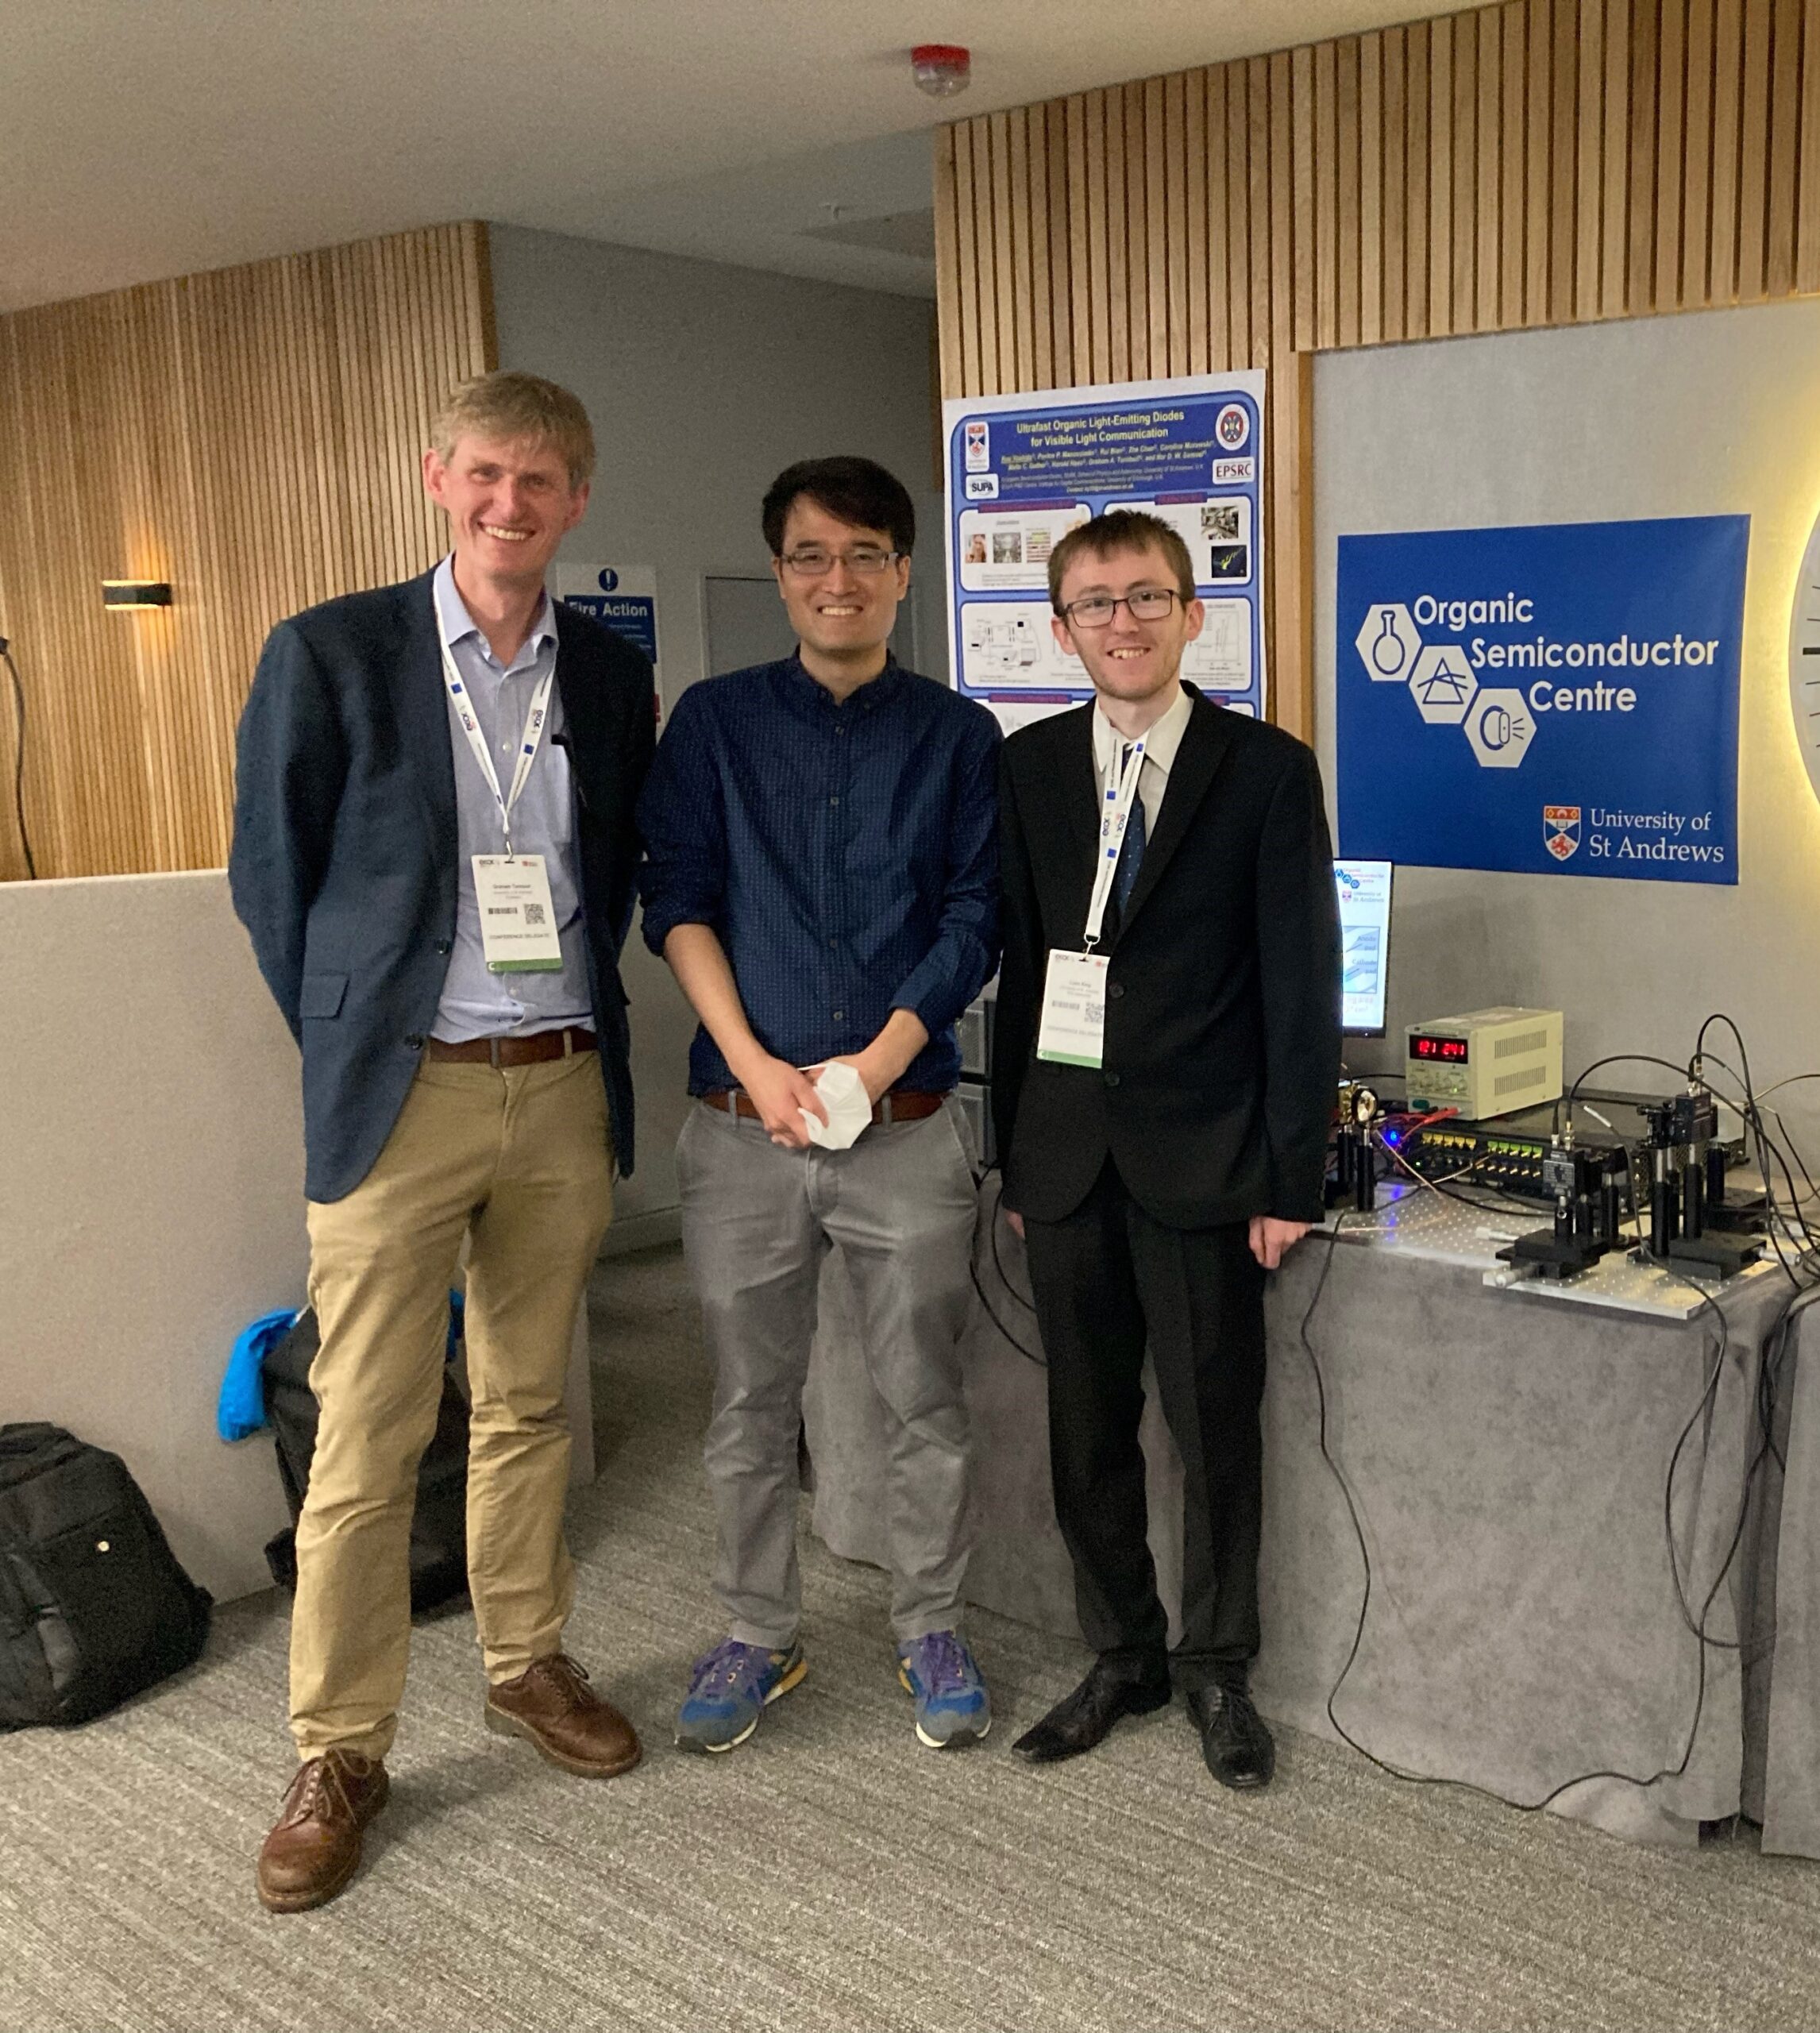 From left to right. Graham, Kou and Liam. on the right is some scientific equipment and behind them is a conference poster